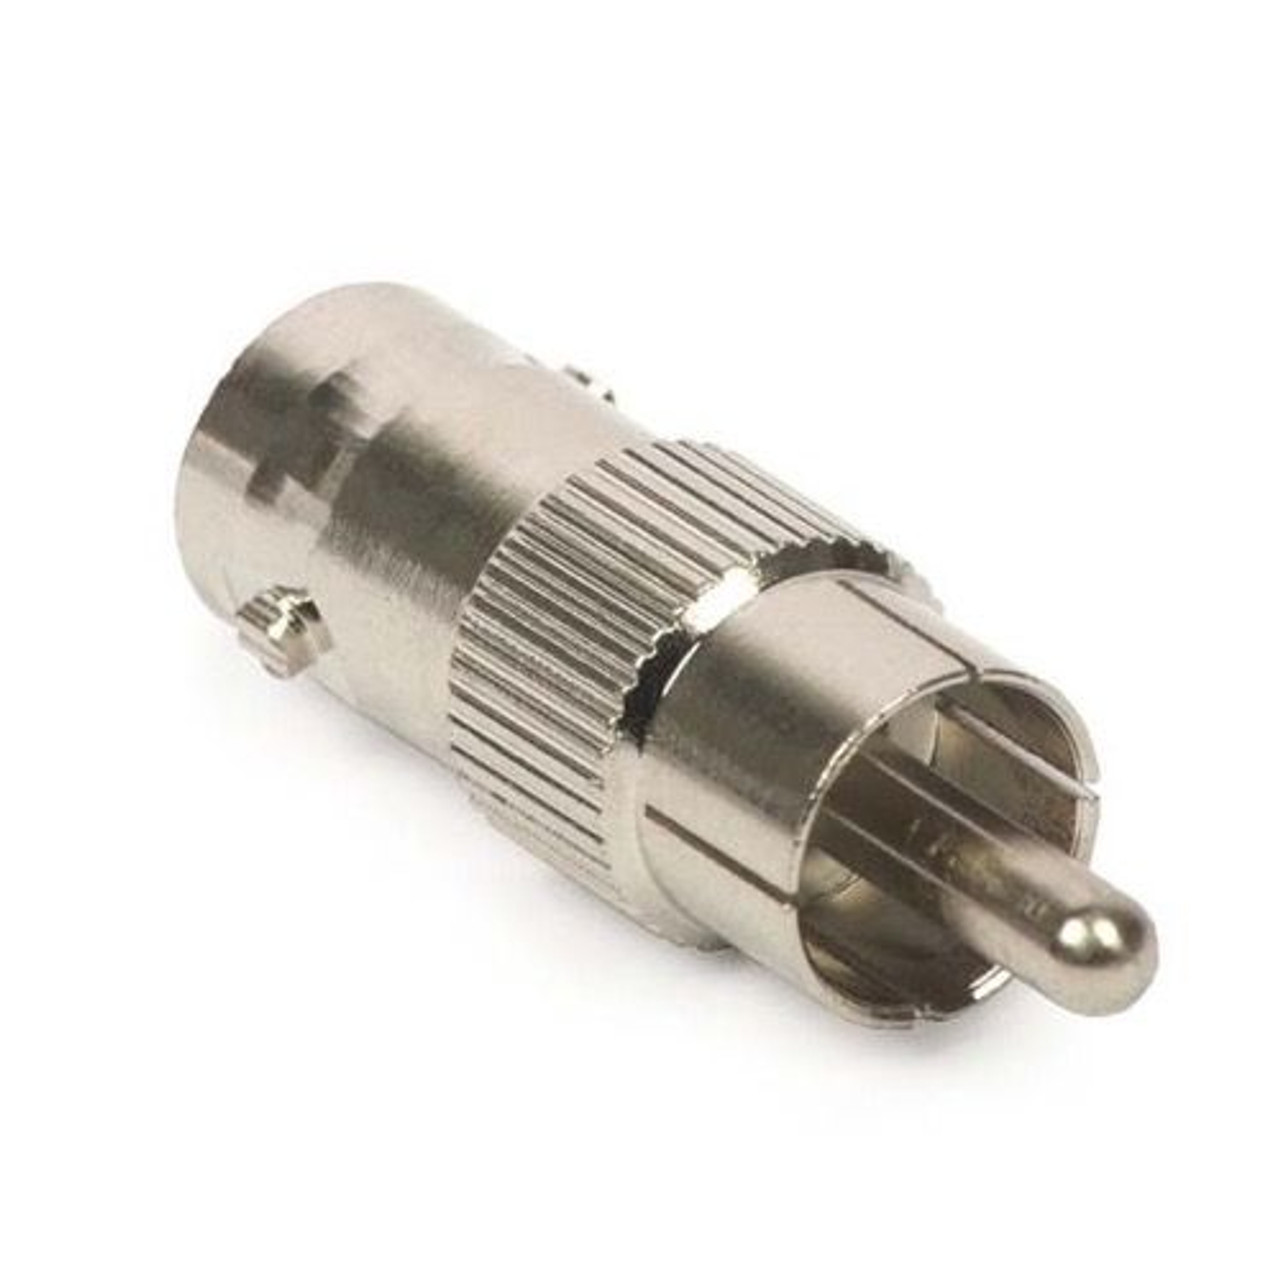 Summit BNC Female to RCA Male Adapter Connector Plug Nickel Plated, RF Digital Commercial Audio Video Component